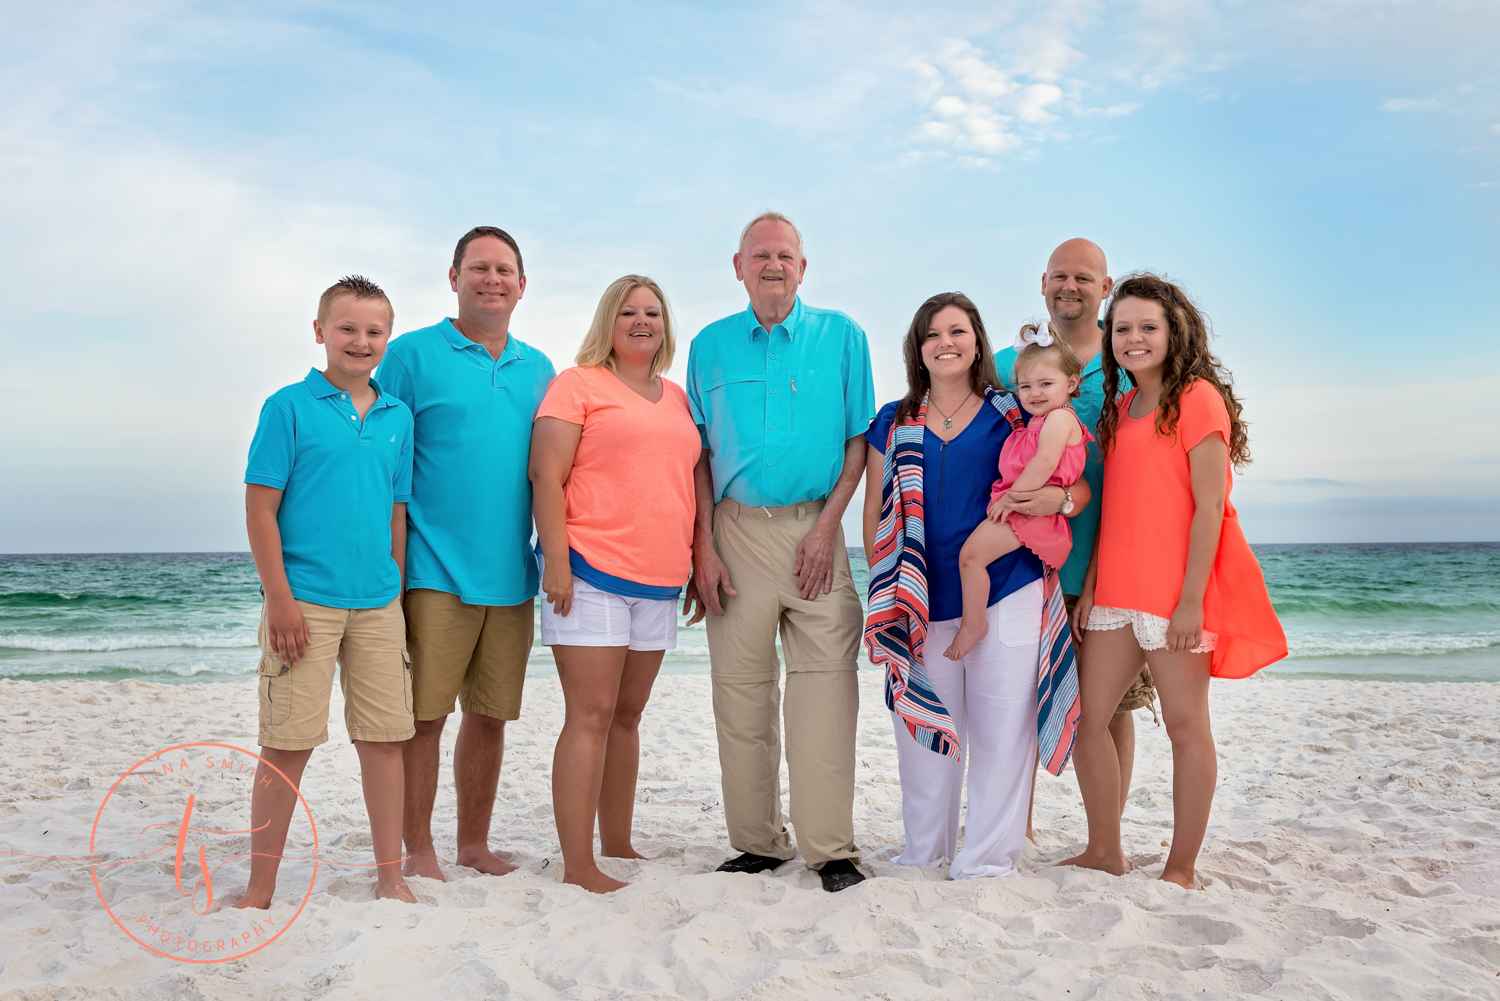 large family standing on beach smiling for photographer